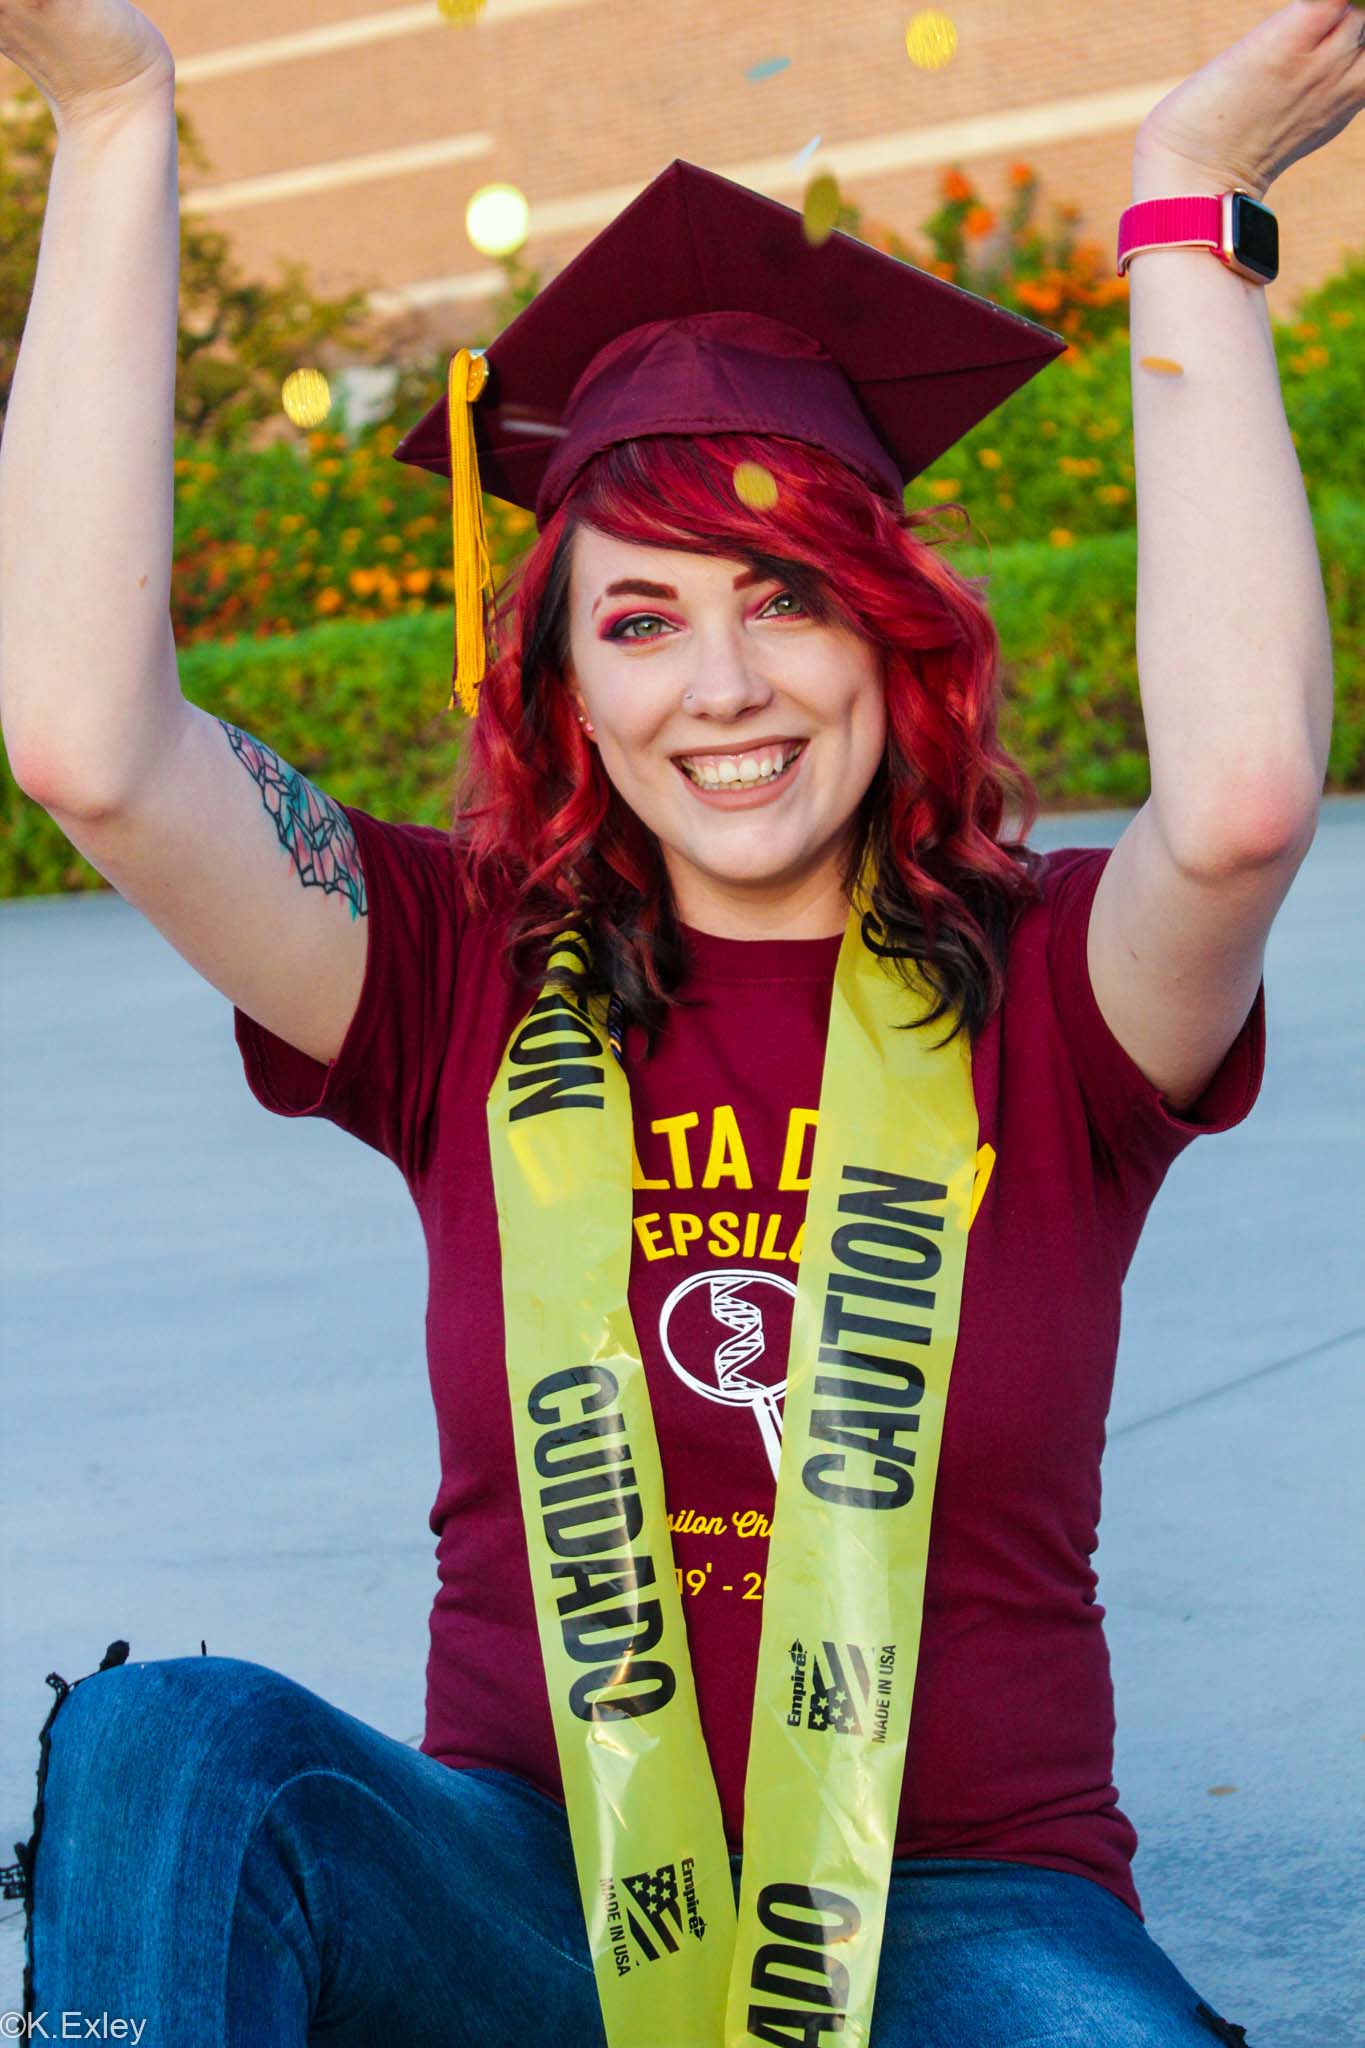 ASU grad Chelsie Marshall in her graduation cap with a caution tape sash